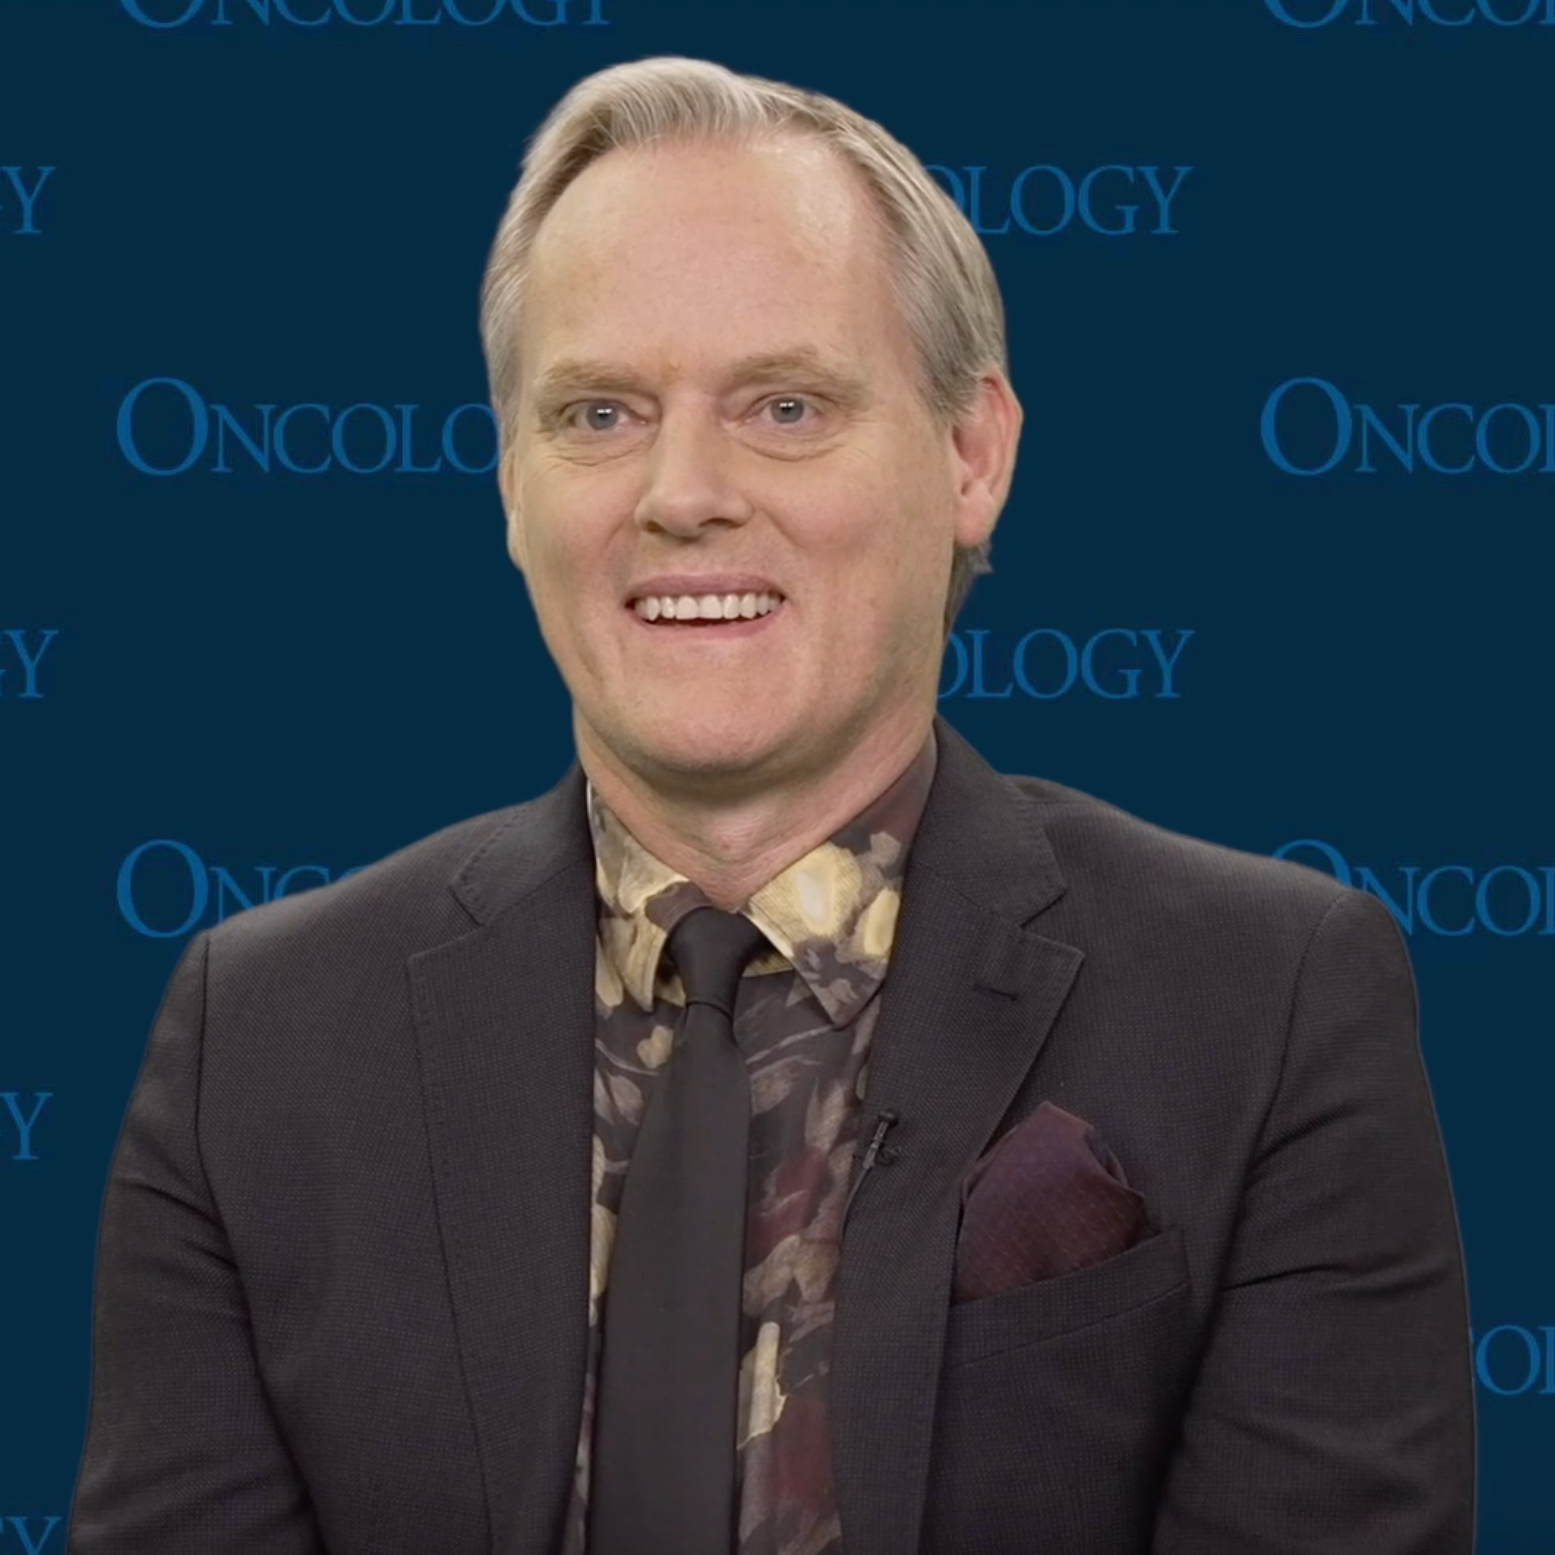 MRD Tracking May Allow More ‘Individualized’ Management of Multiple Myeloma